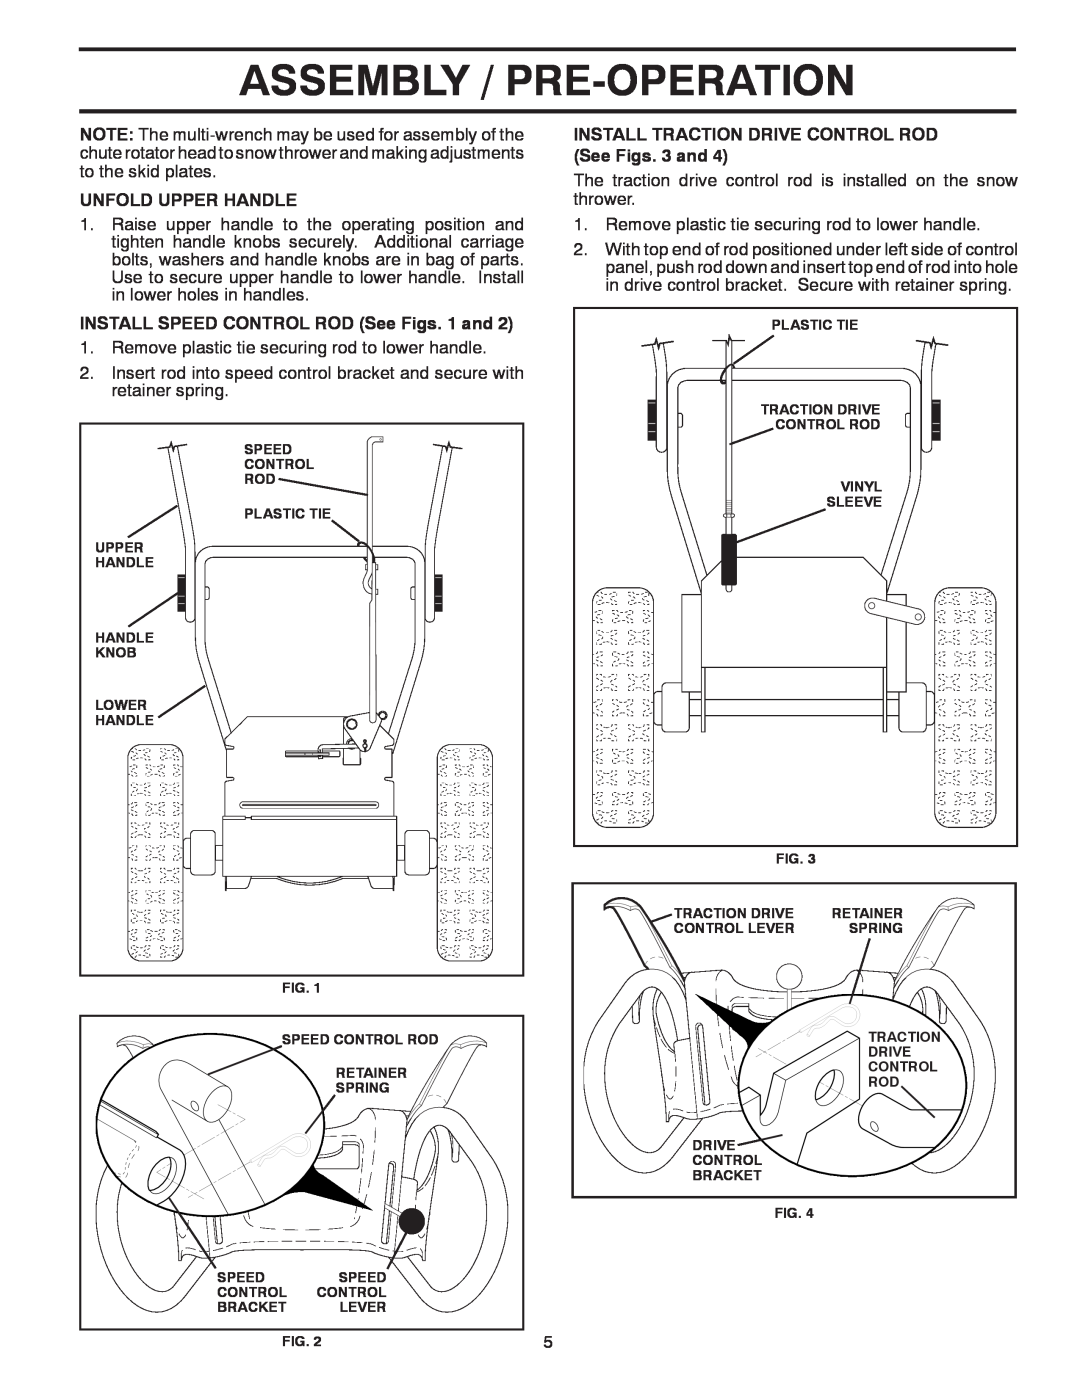 Poulan 96192004501 Assembly / Pre-Operation, Unfold Upper Handle, INSTALL SPEED CONTROL ROD See Figs. 1 and, Plastic Tie 